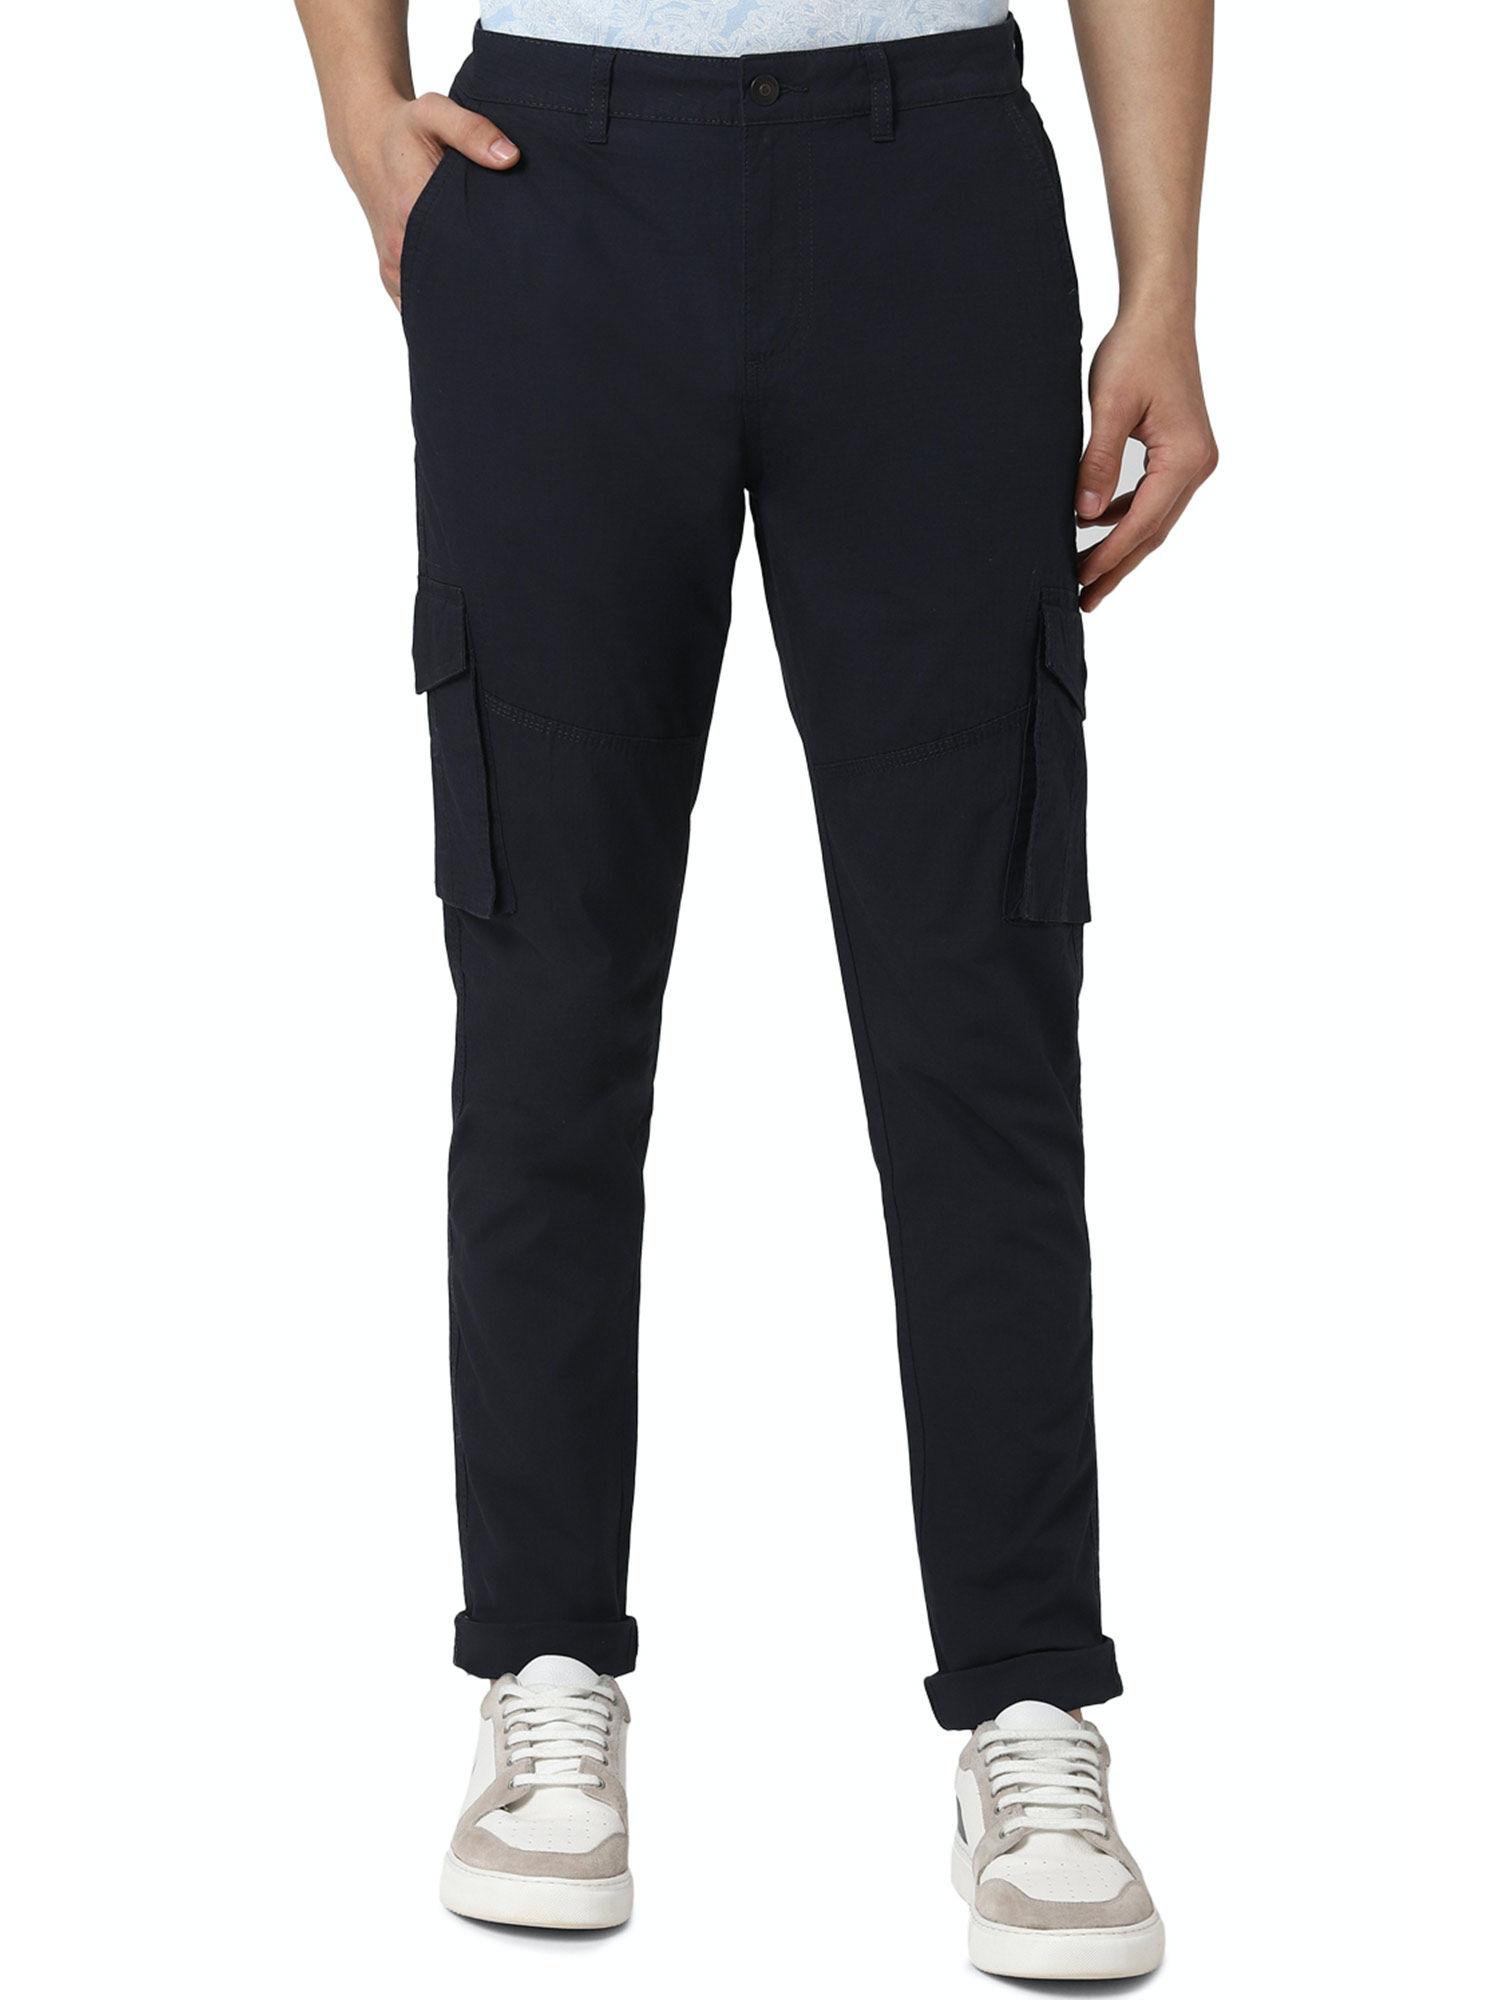 navy-blue-solid-casual-trouser